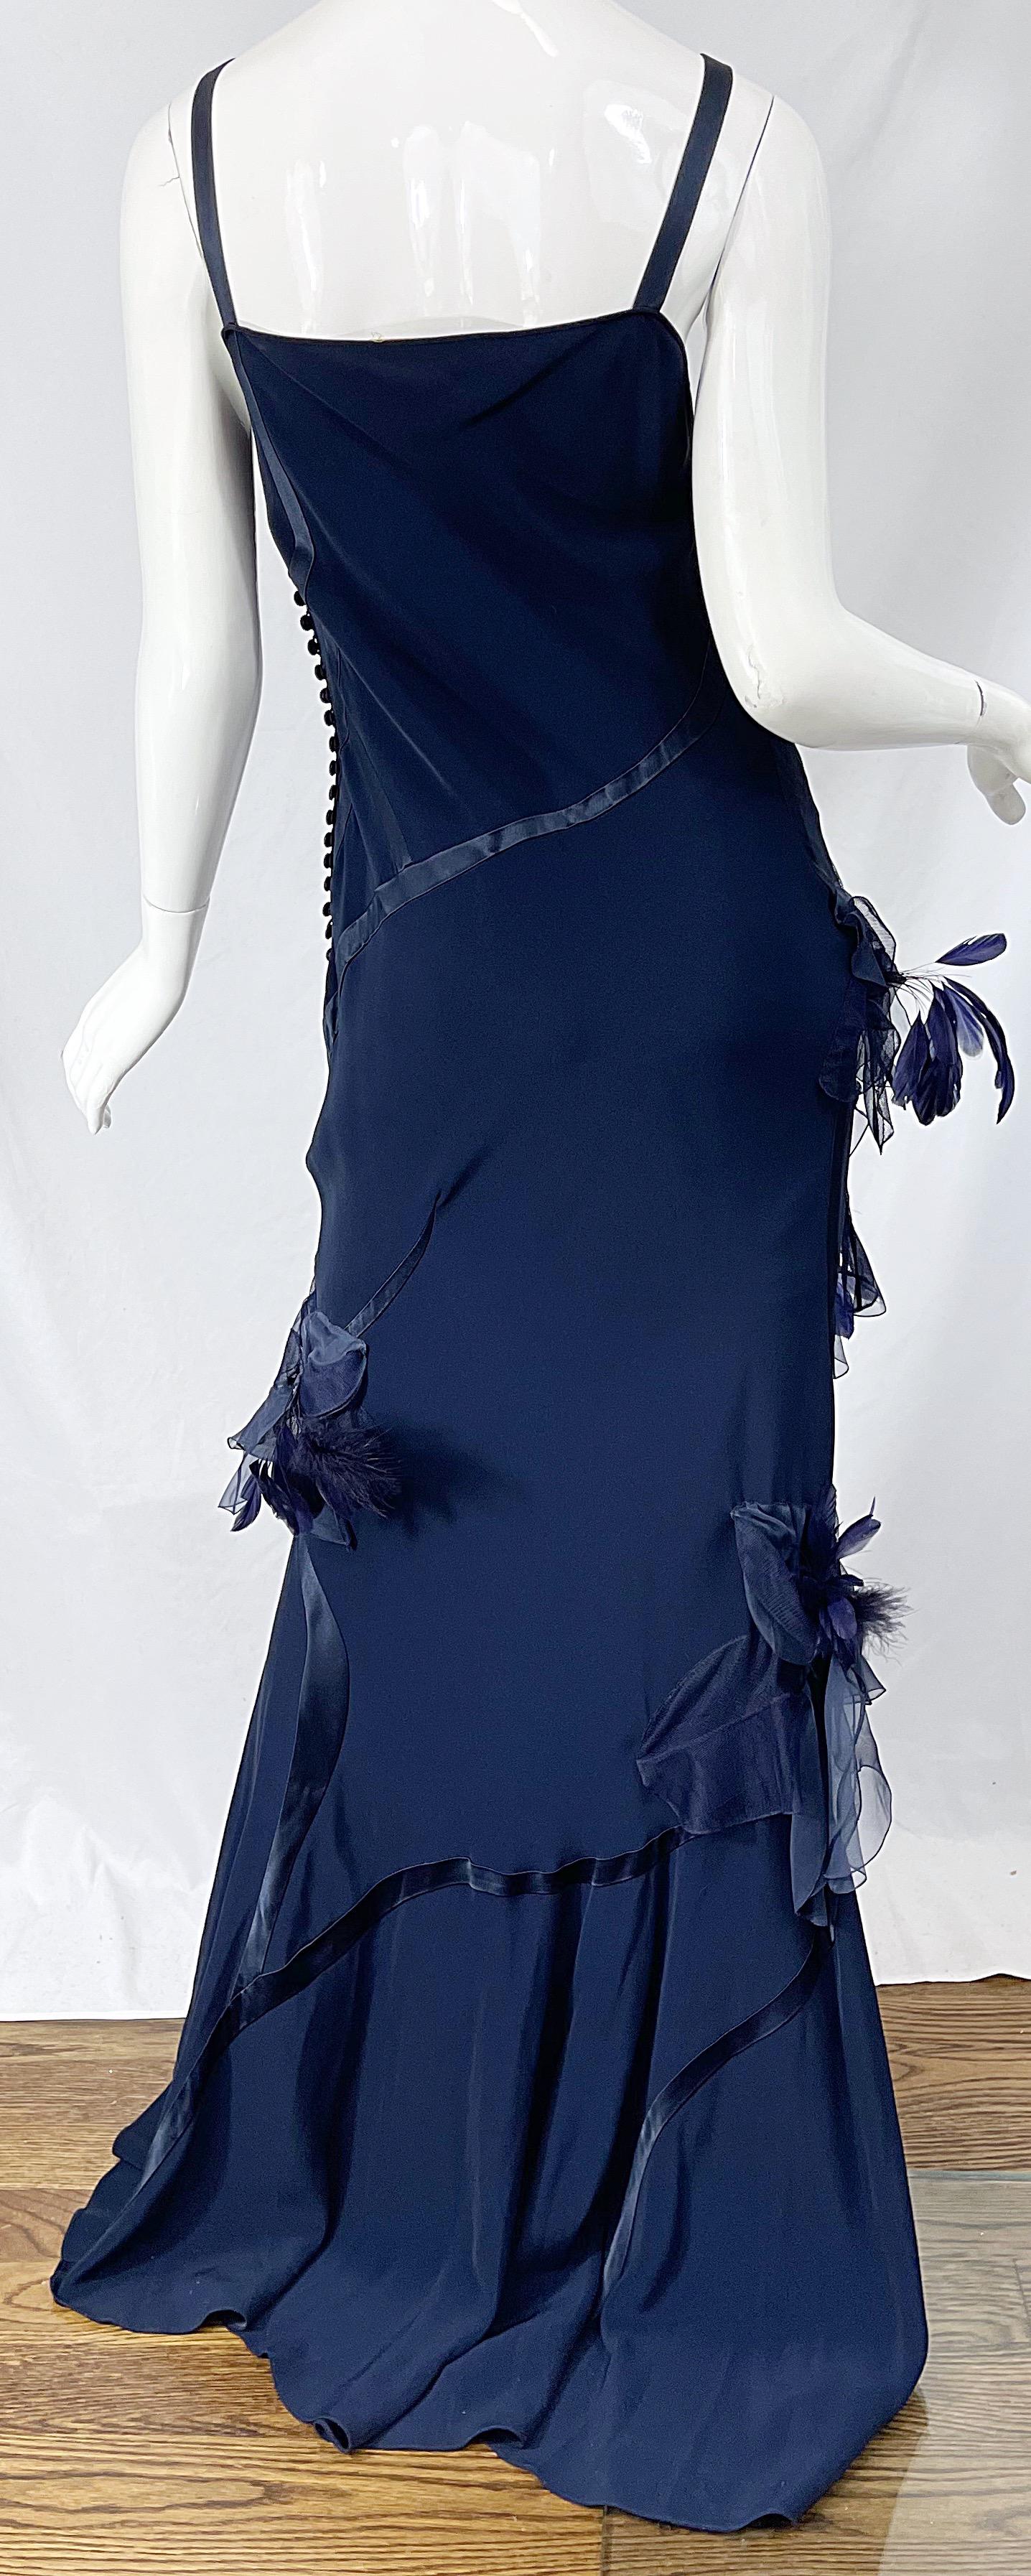 NWT John Galliano Size 10 Early 2000s Navy Blue Feather Silk / Satin Gown Dress 5